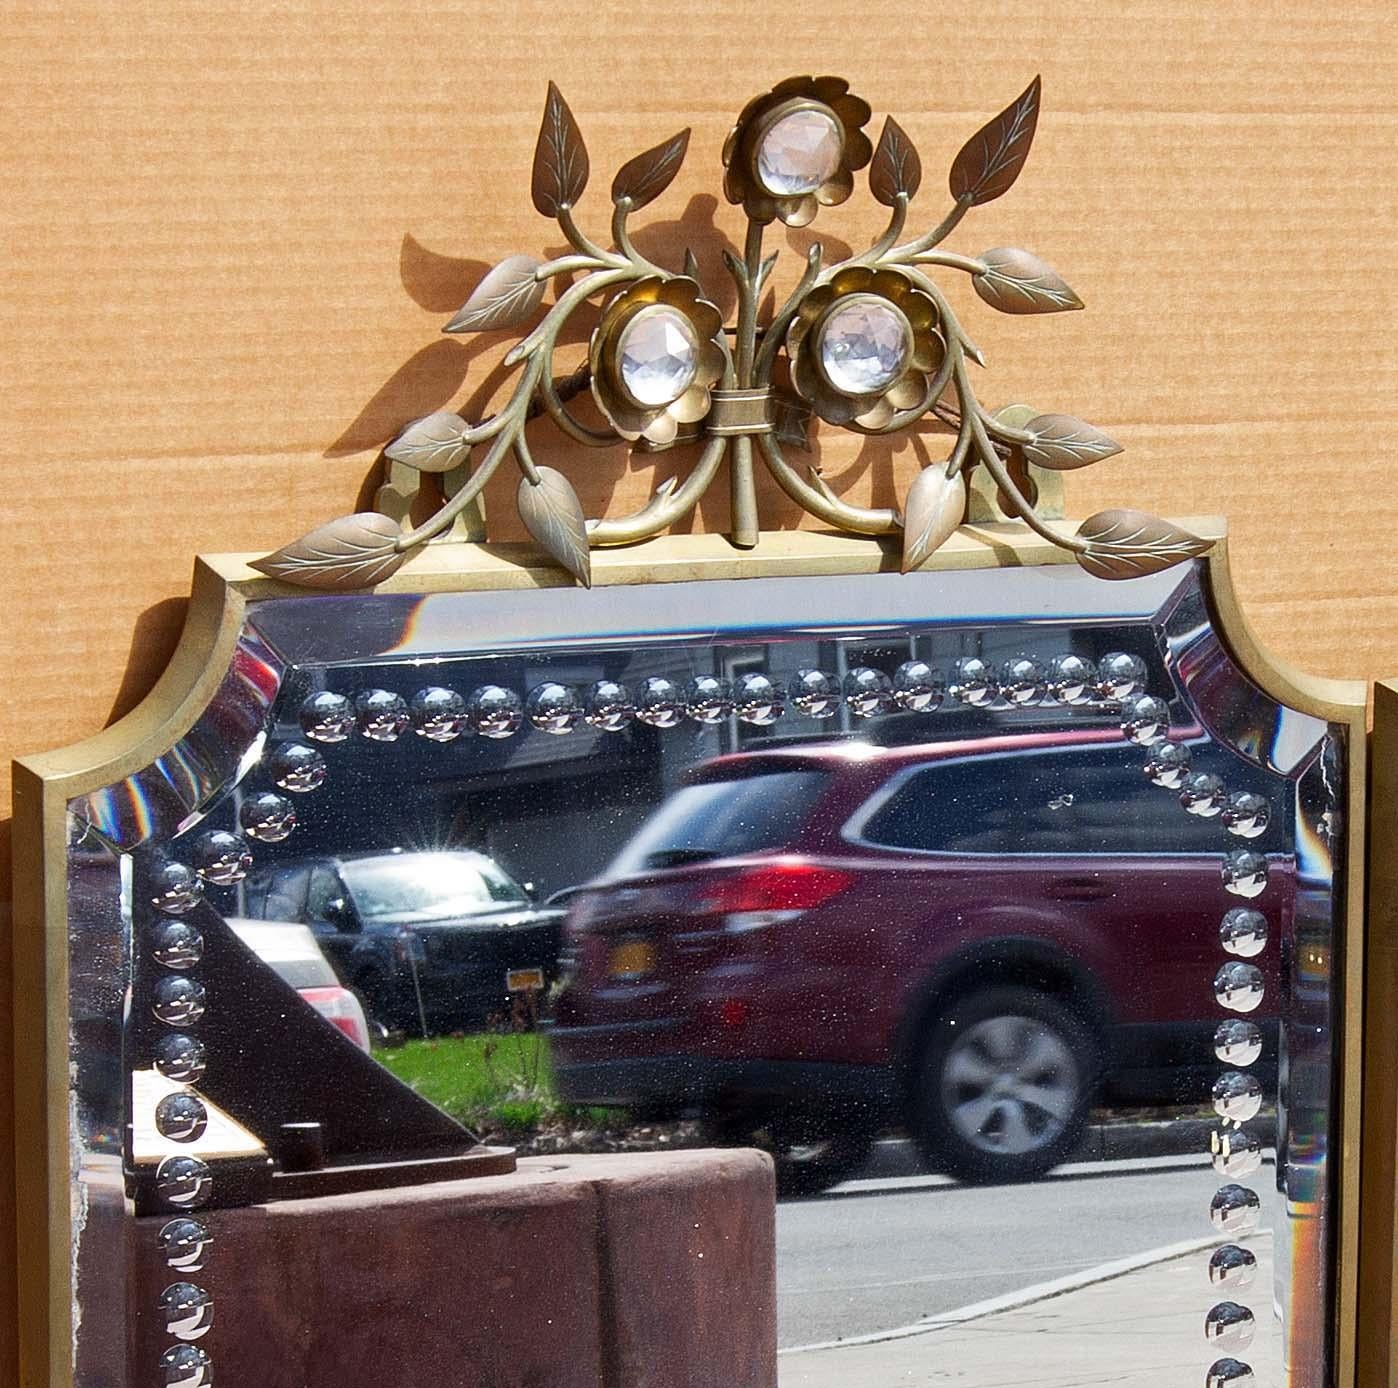 Elegant French modern console mirror. Unusual and refined design. Solid brass frame. Cut glass floral decorations. fine beveled mirror. Solid wood backing, circa 1940s. Available as a pair.






















Hollywood regency moderne art deco